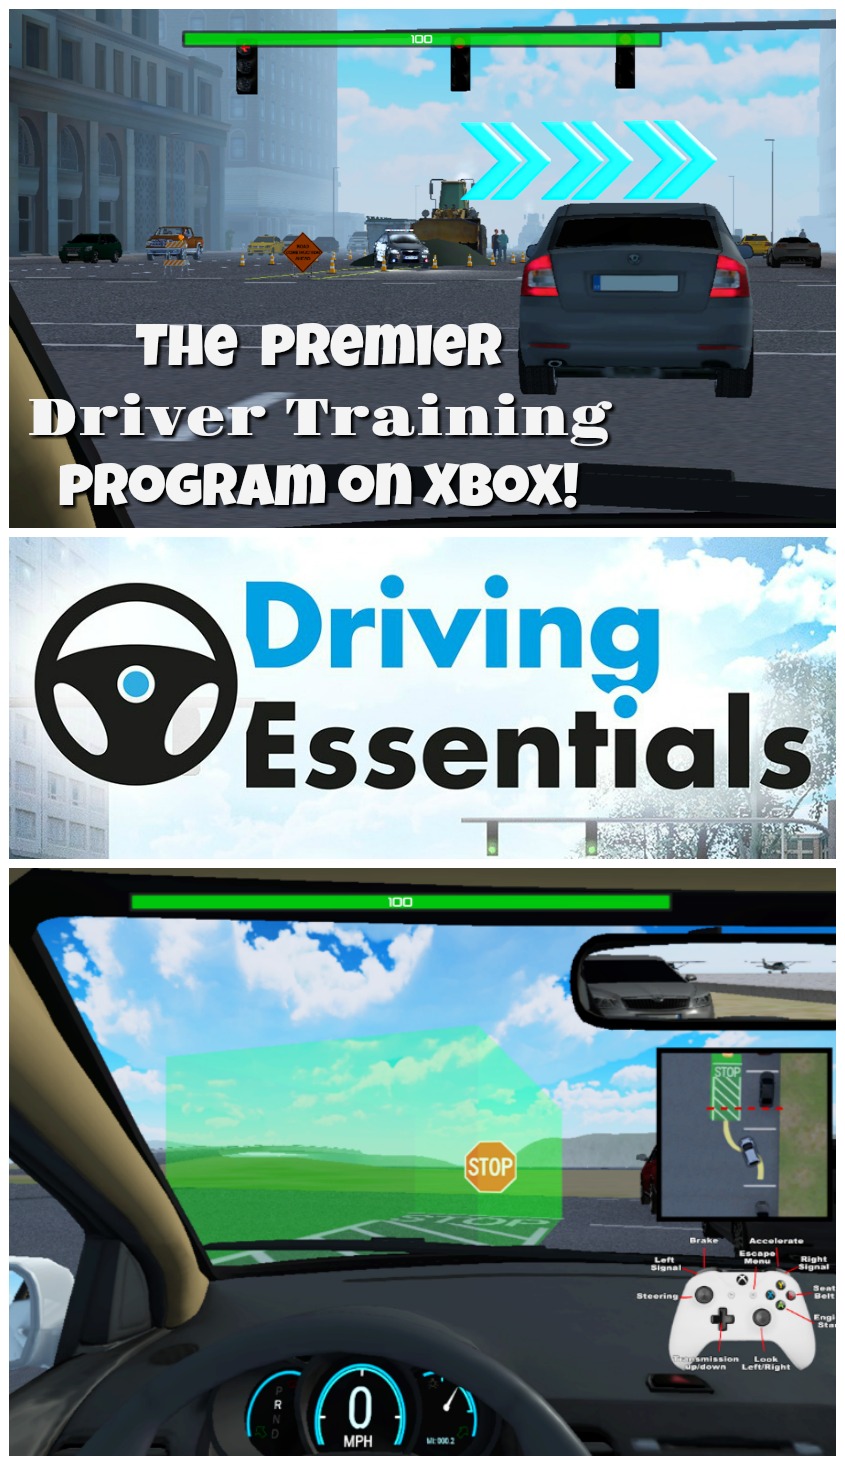 Driving Essentials XE, The Perfect Driver Training Program for Your Teen on Xbox! #driving #teens #parenting #learningtodrive 